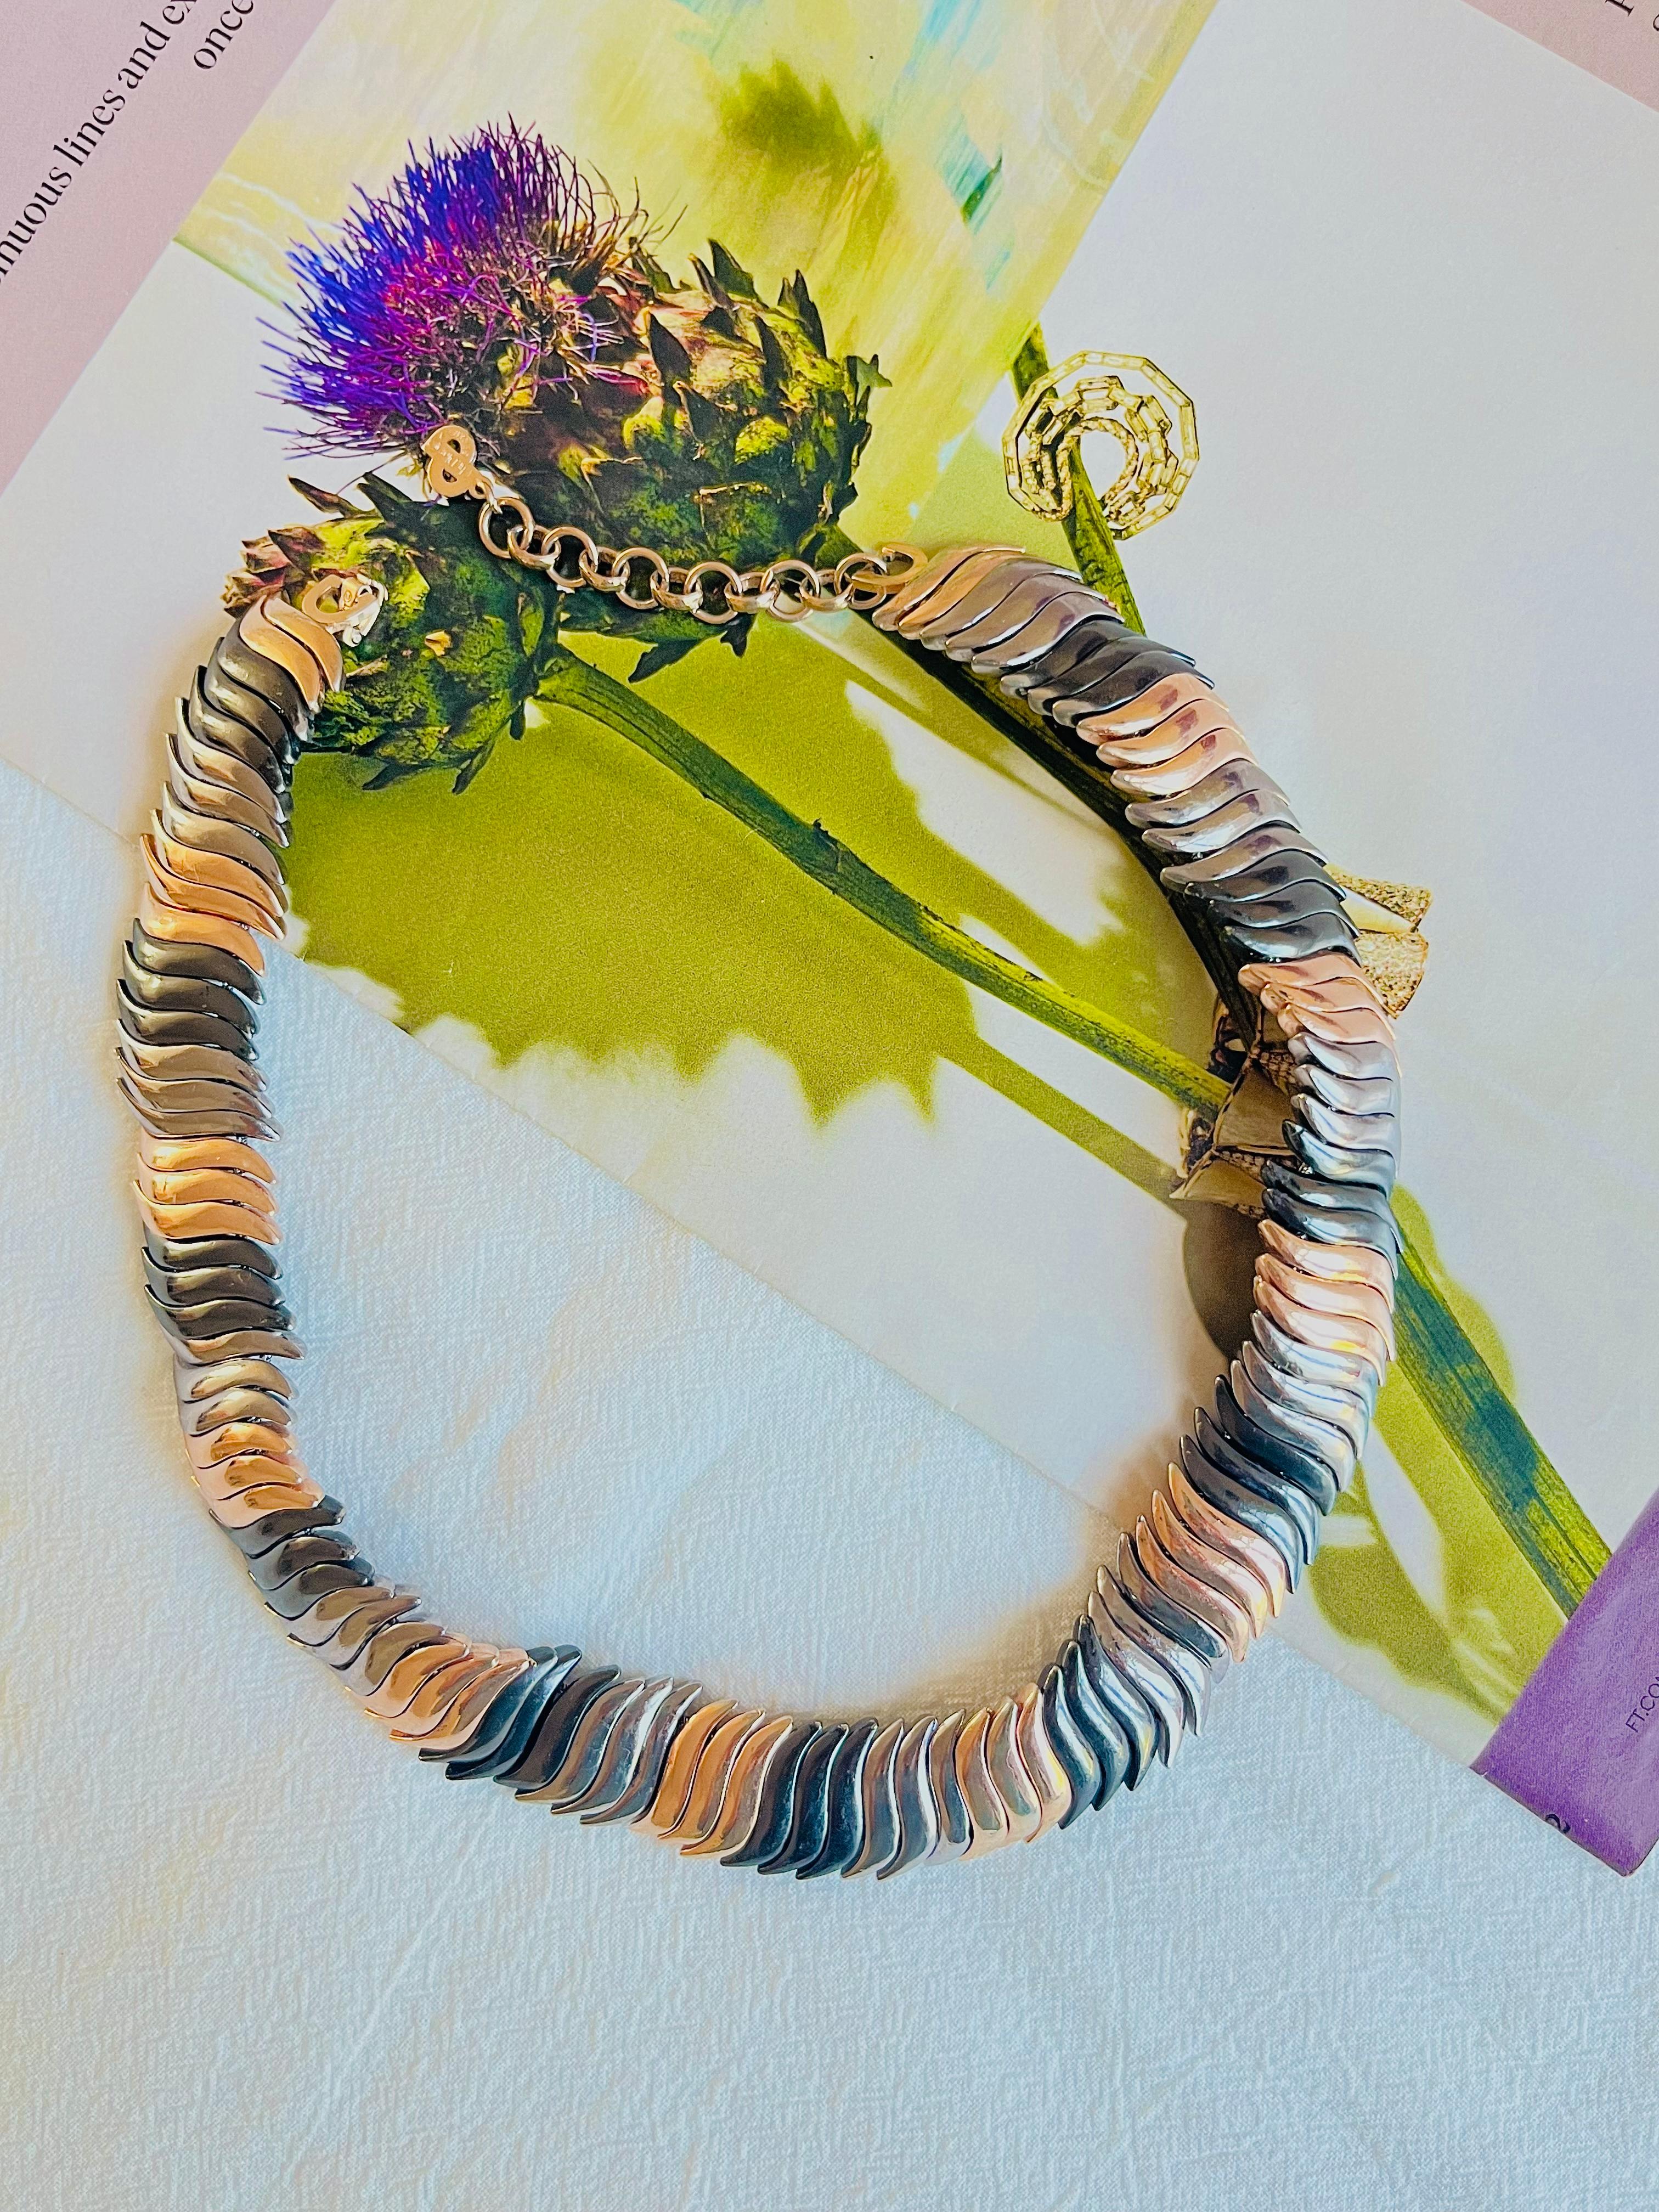 Christian Dior Vintage 1980s Unisex Ribbed Omega Grey Black Chunky Choker Necklace, Rose Gold Plated

Very good condition. 100% Genuine. Very light scratches or color loss, barely noticeable.

Marked 'Chr.Dior (C) '. Rare to find.

Materials: Rose